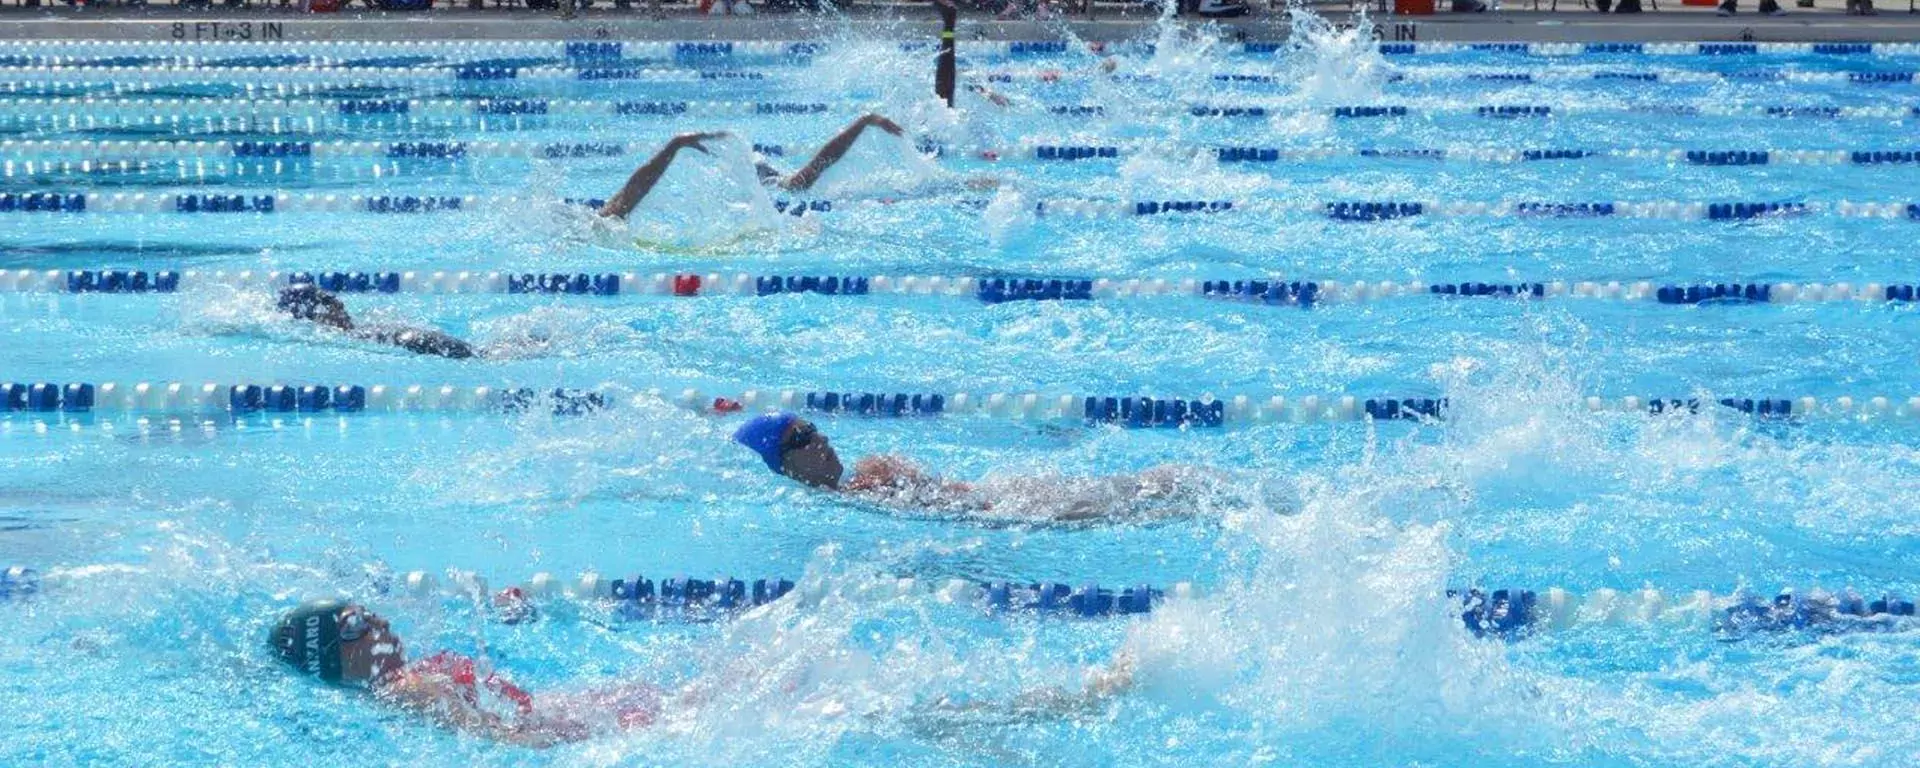 Swimmers at the Aquatic Center